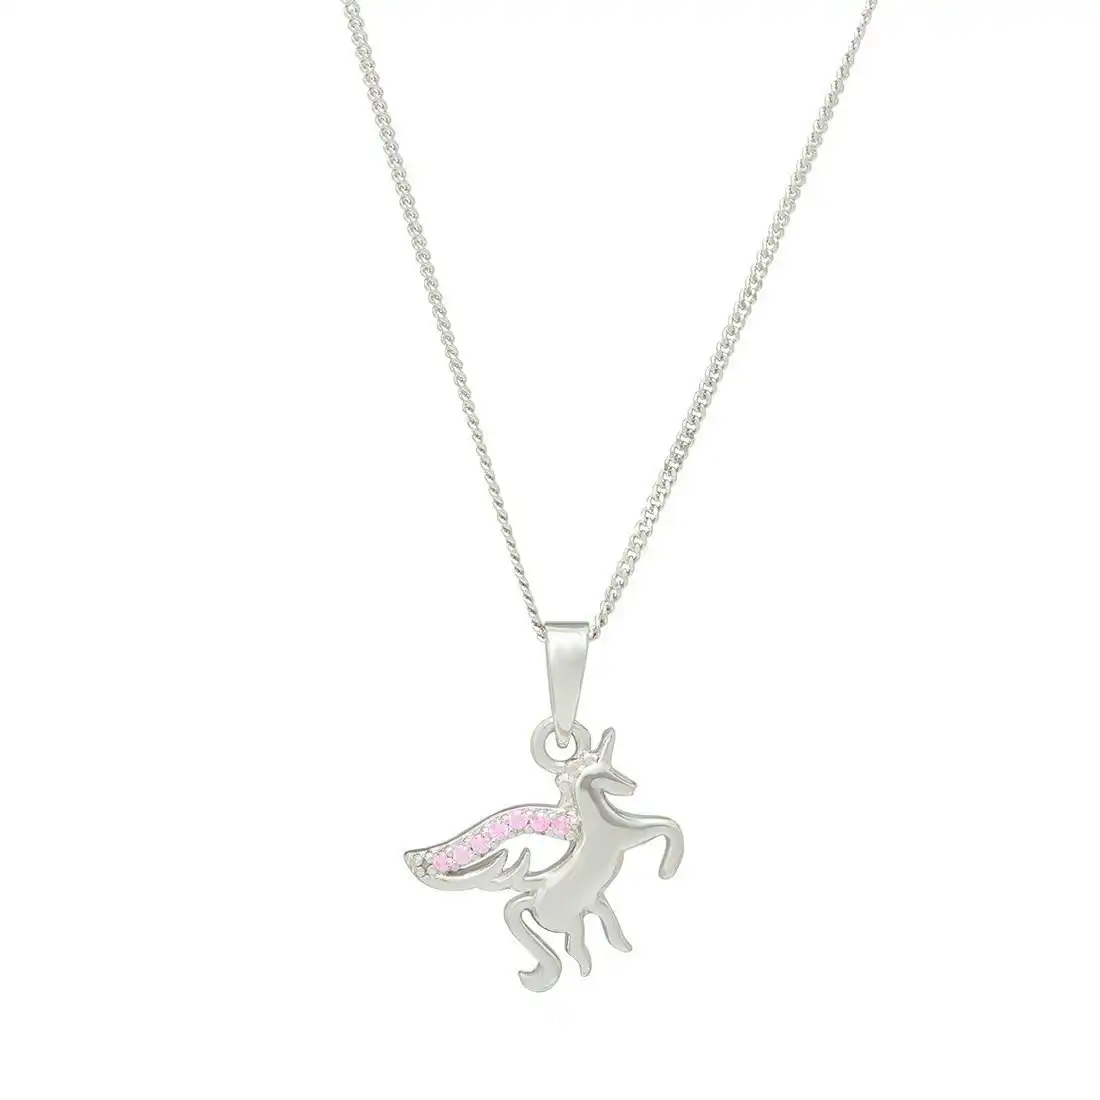 45cm Children's Pink Cubic Zirconia Unicorn Necklace in Sterling Silver